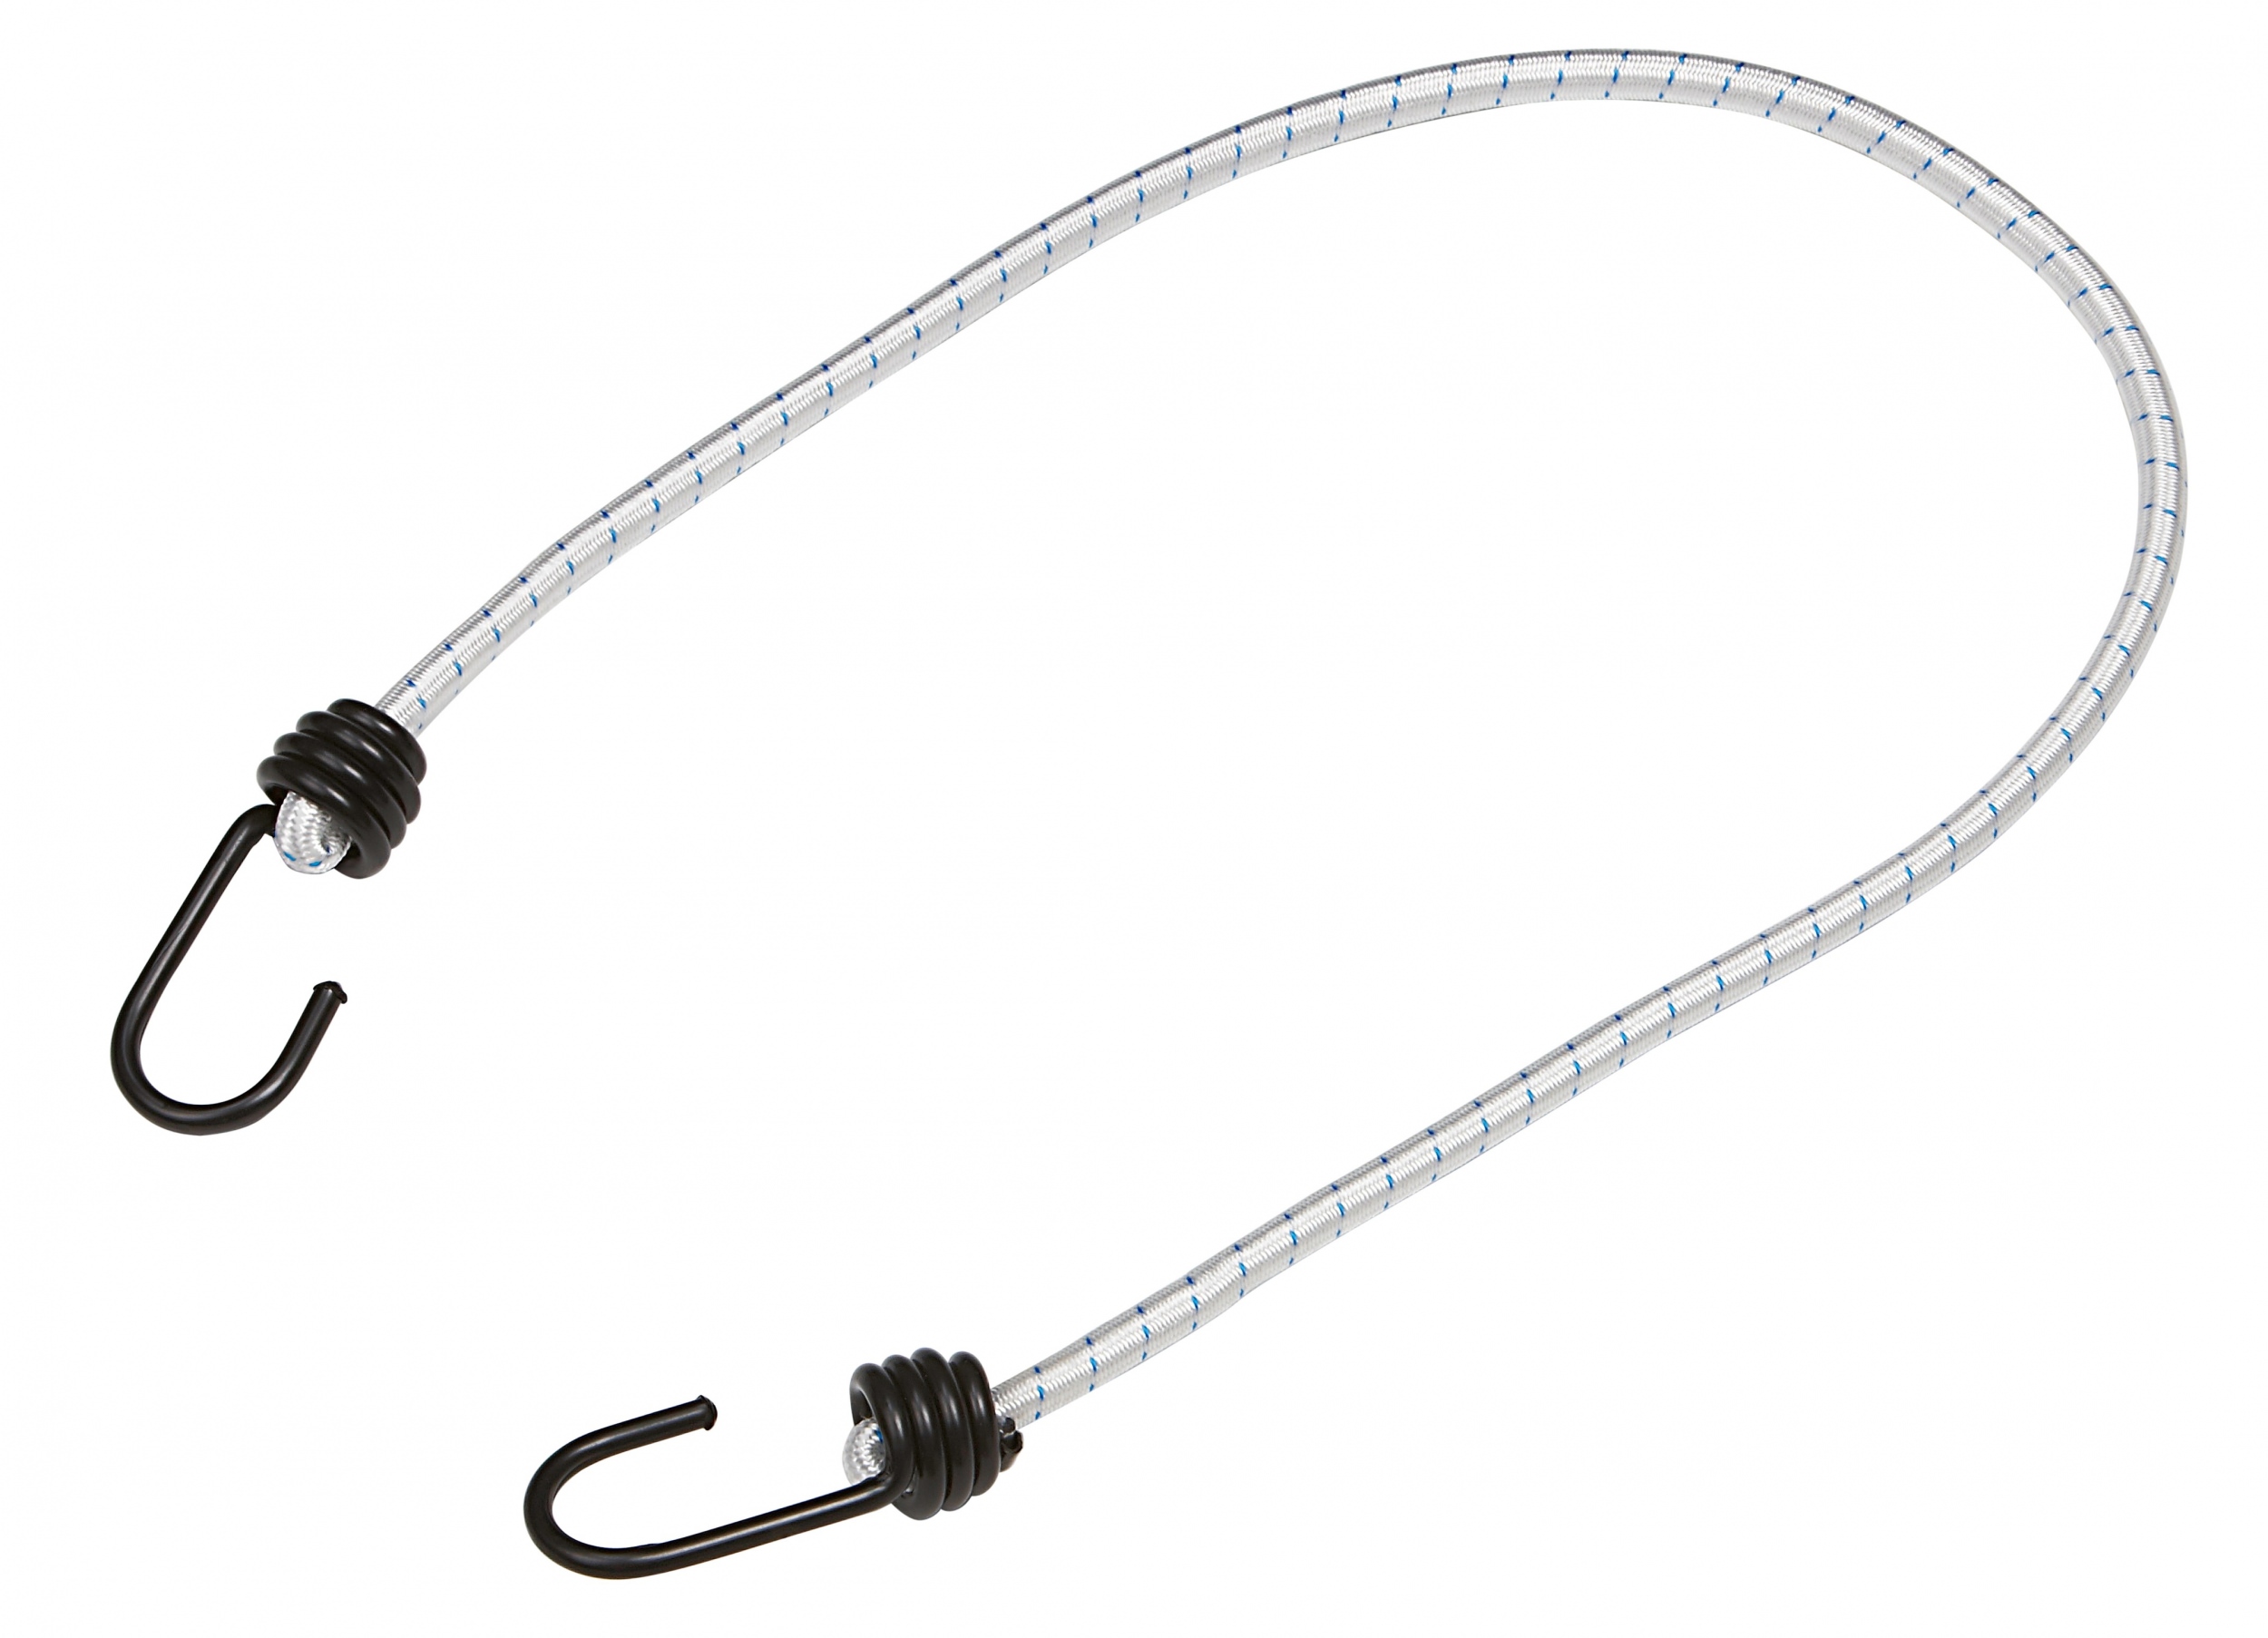 Tensioning Rope with Hooks | Safetynet365